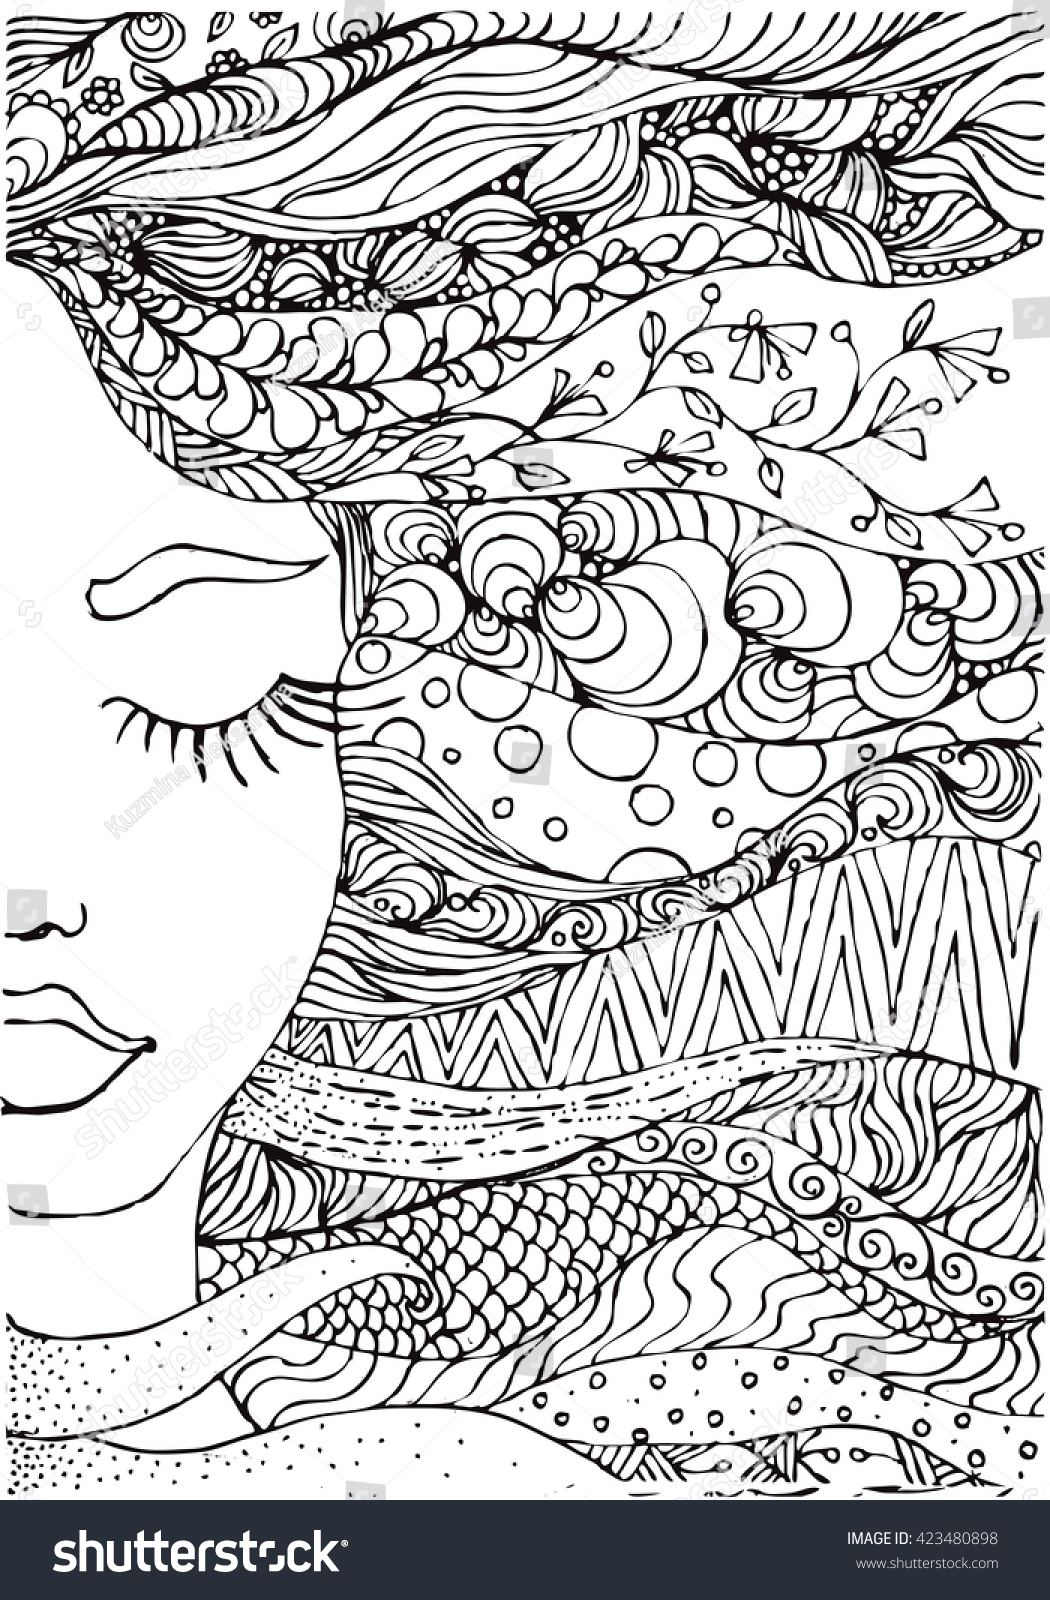 yellow hair after coloring pages for children - photo #28